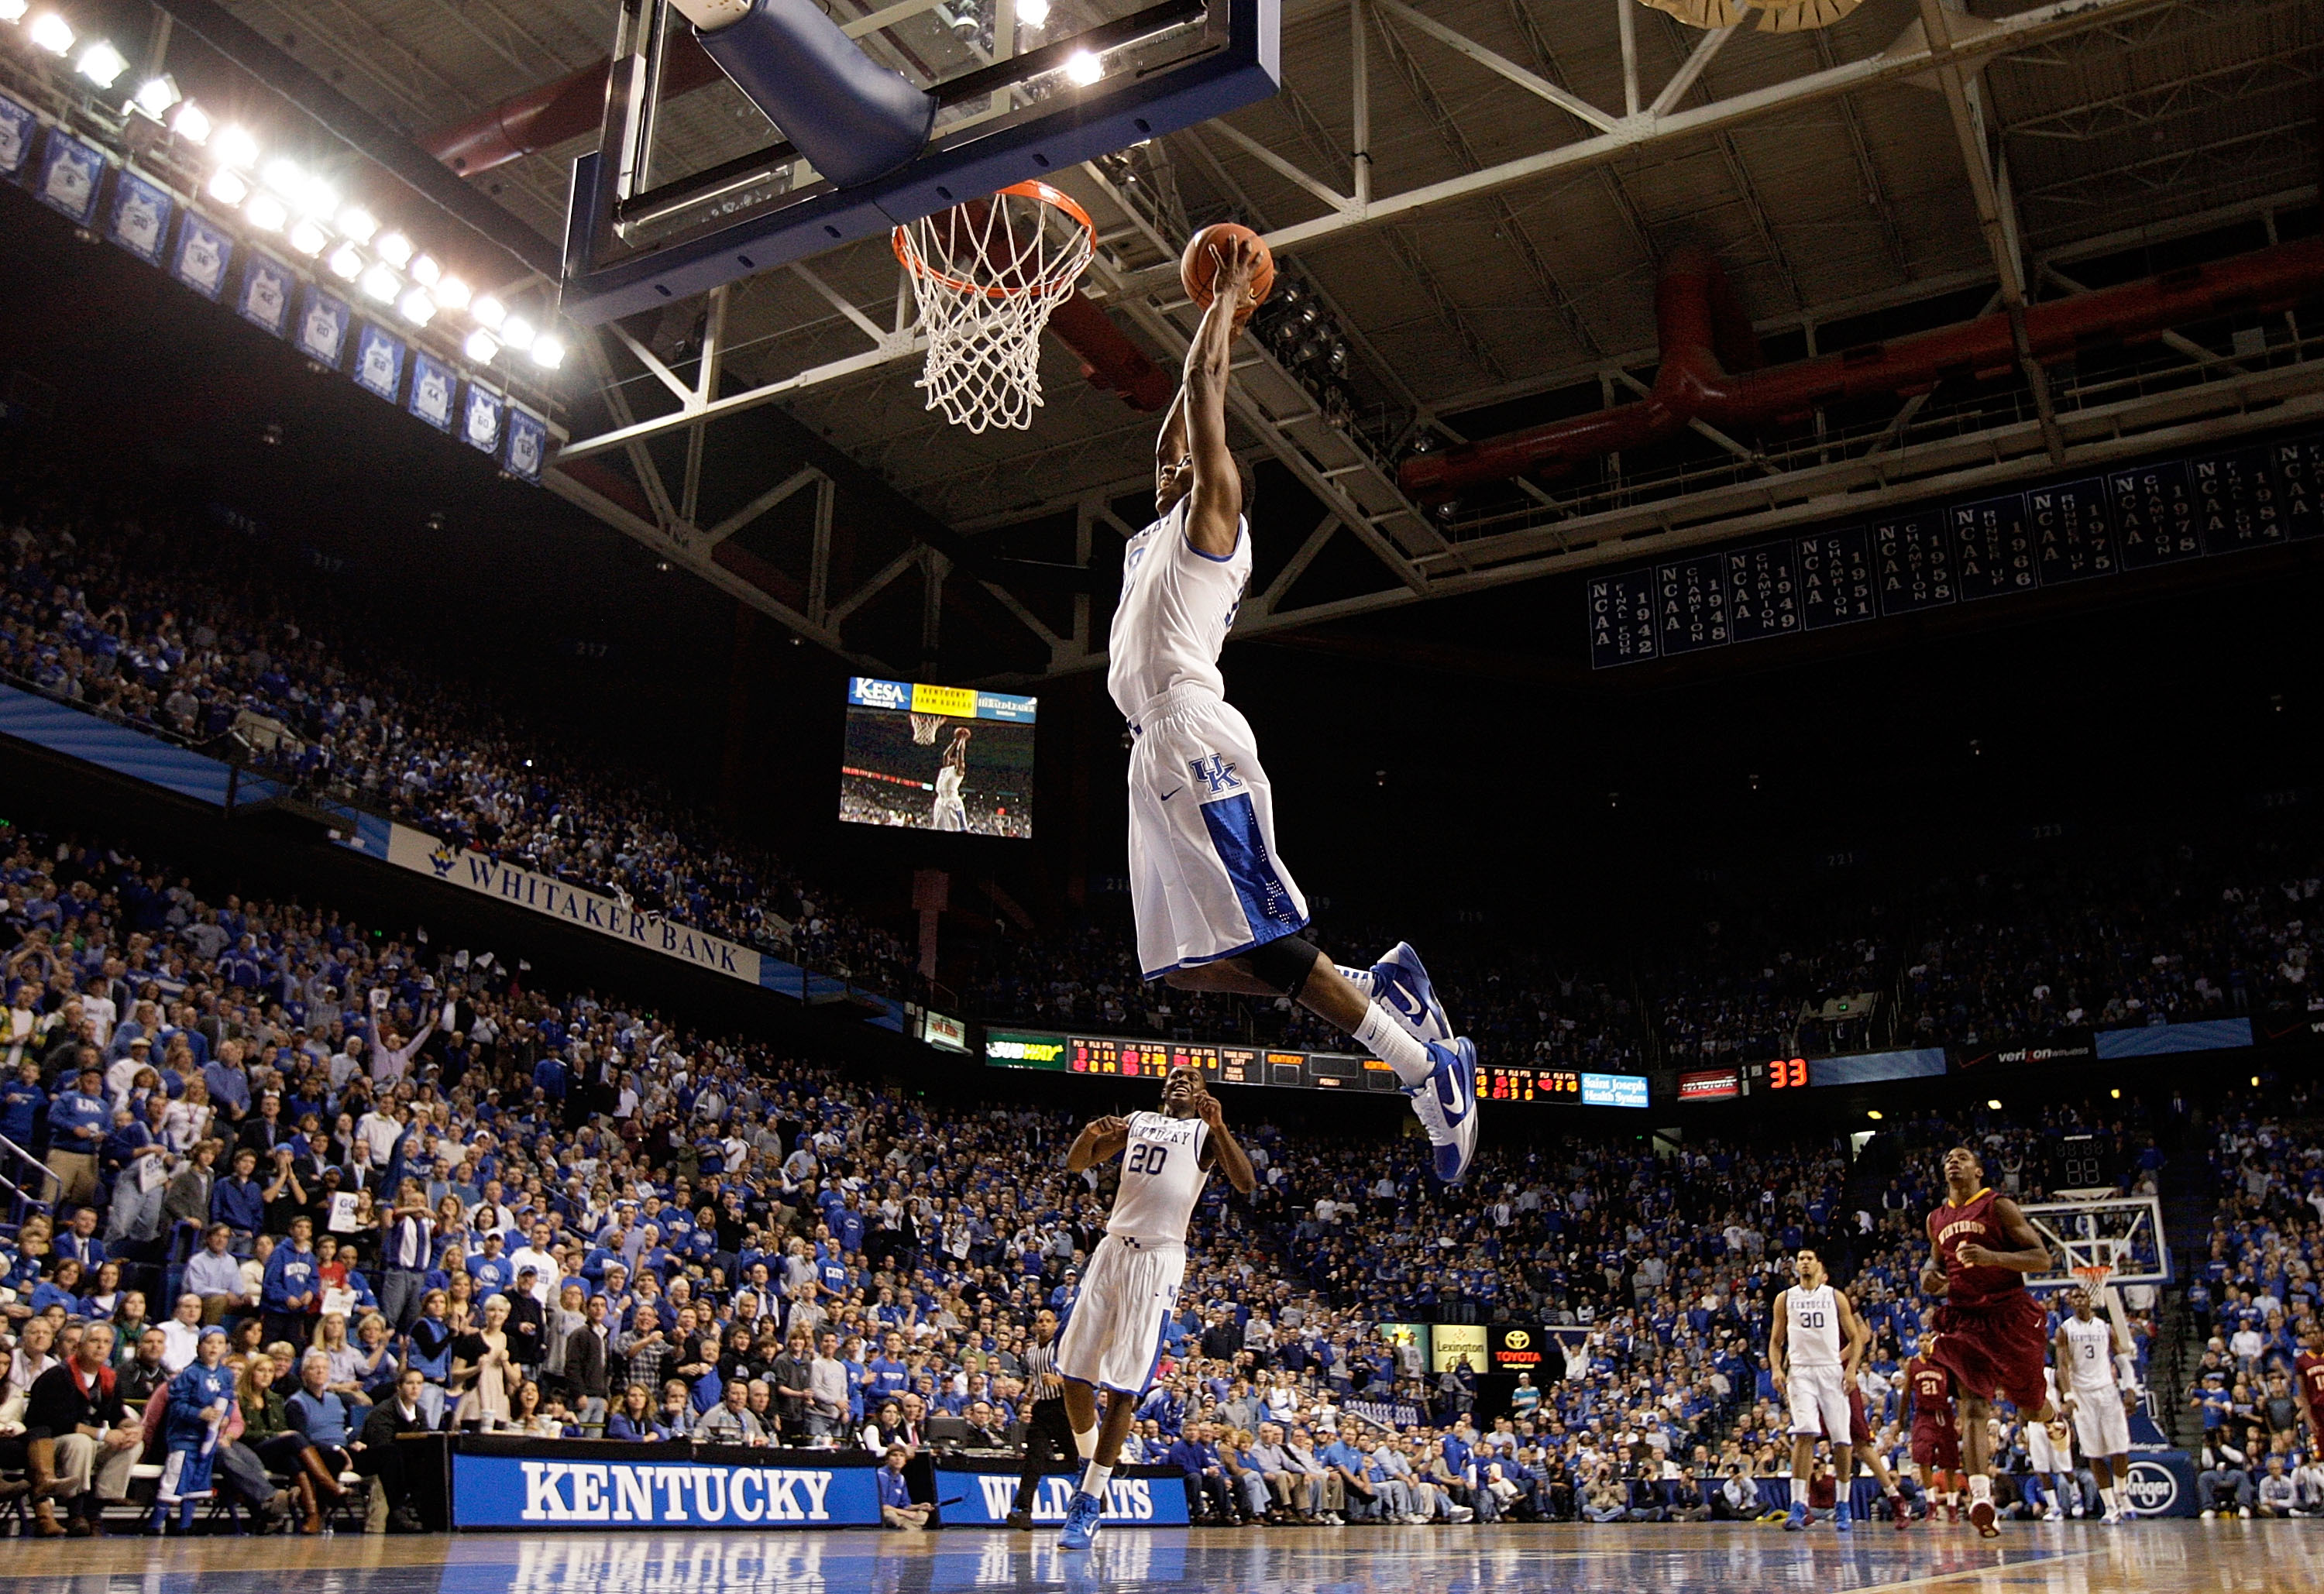 LEXINGTON, KY - DECEMBER 22:  Brandon Knight #12 of the Kentucky Wildcats dunks the ball during the game against the Winthrop Eagles on December 22, 2010 in Lexington, Kentucky.  Kentucky won 89-52.  (Photo by Andy Lyons/Getty Images)